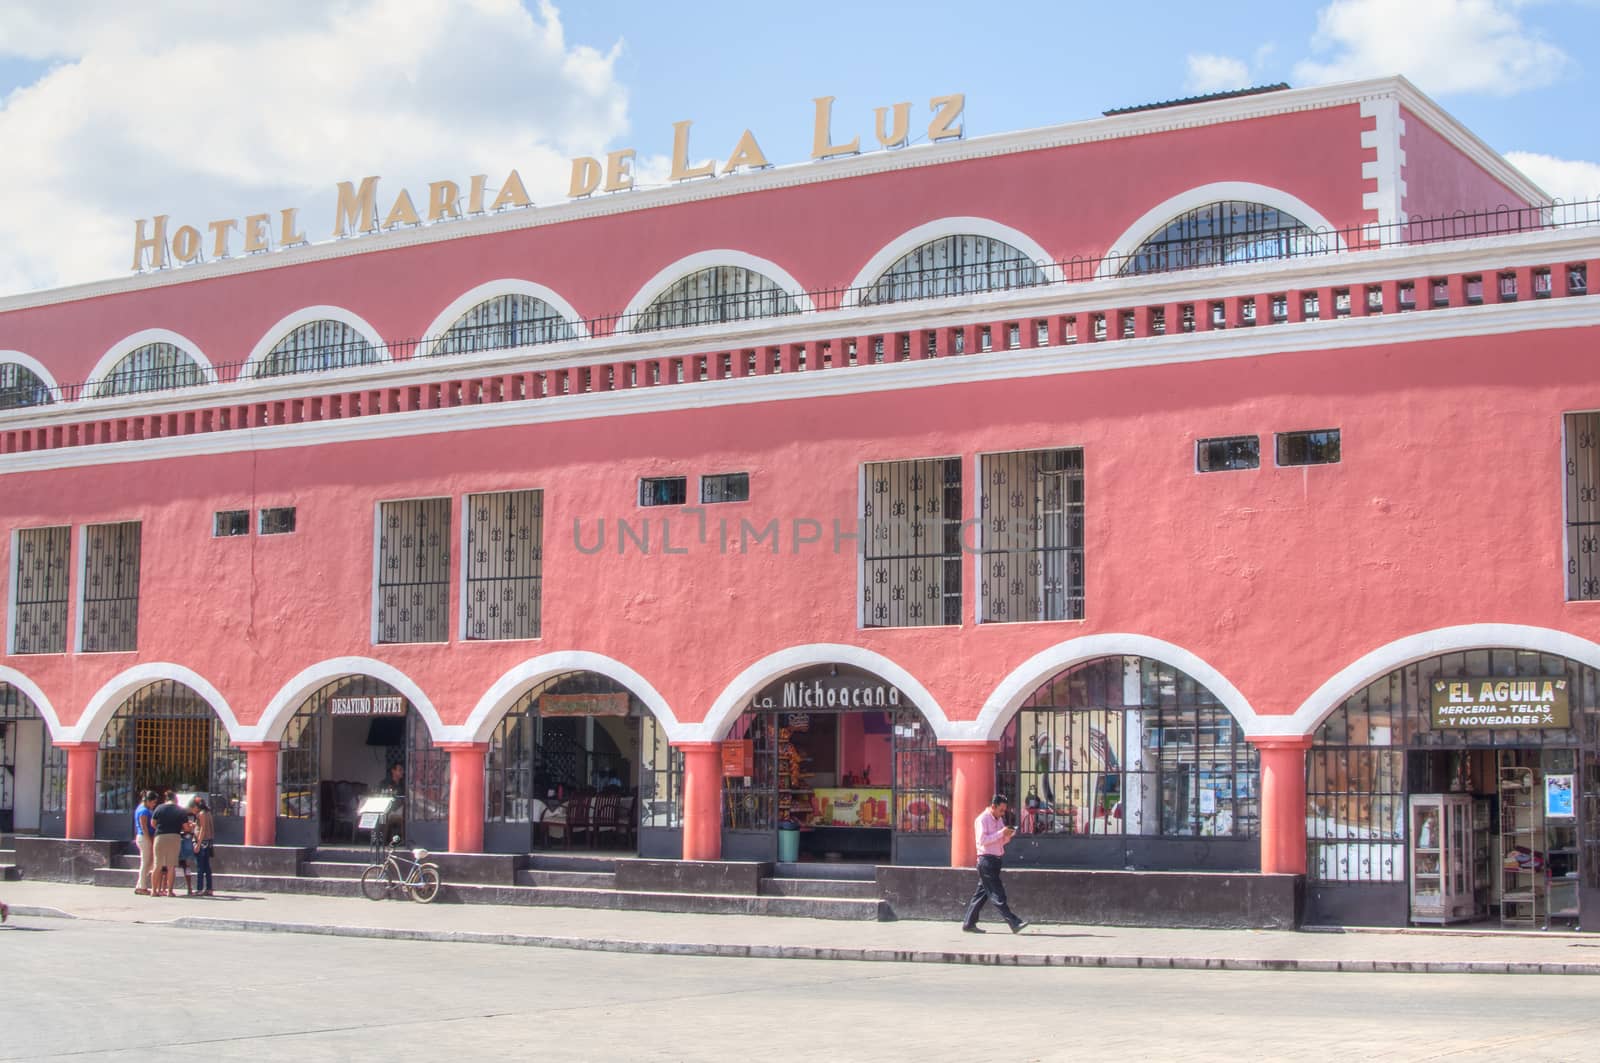 VALLADOLID, MEXICO - JANUARY 20, 2015: Hotel Maria de La Luz next to the town square in Valladolid, Mexico offers 70 rooms in a beautiful colonial style building